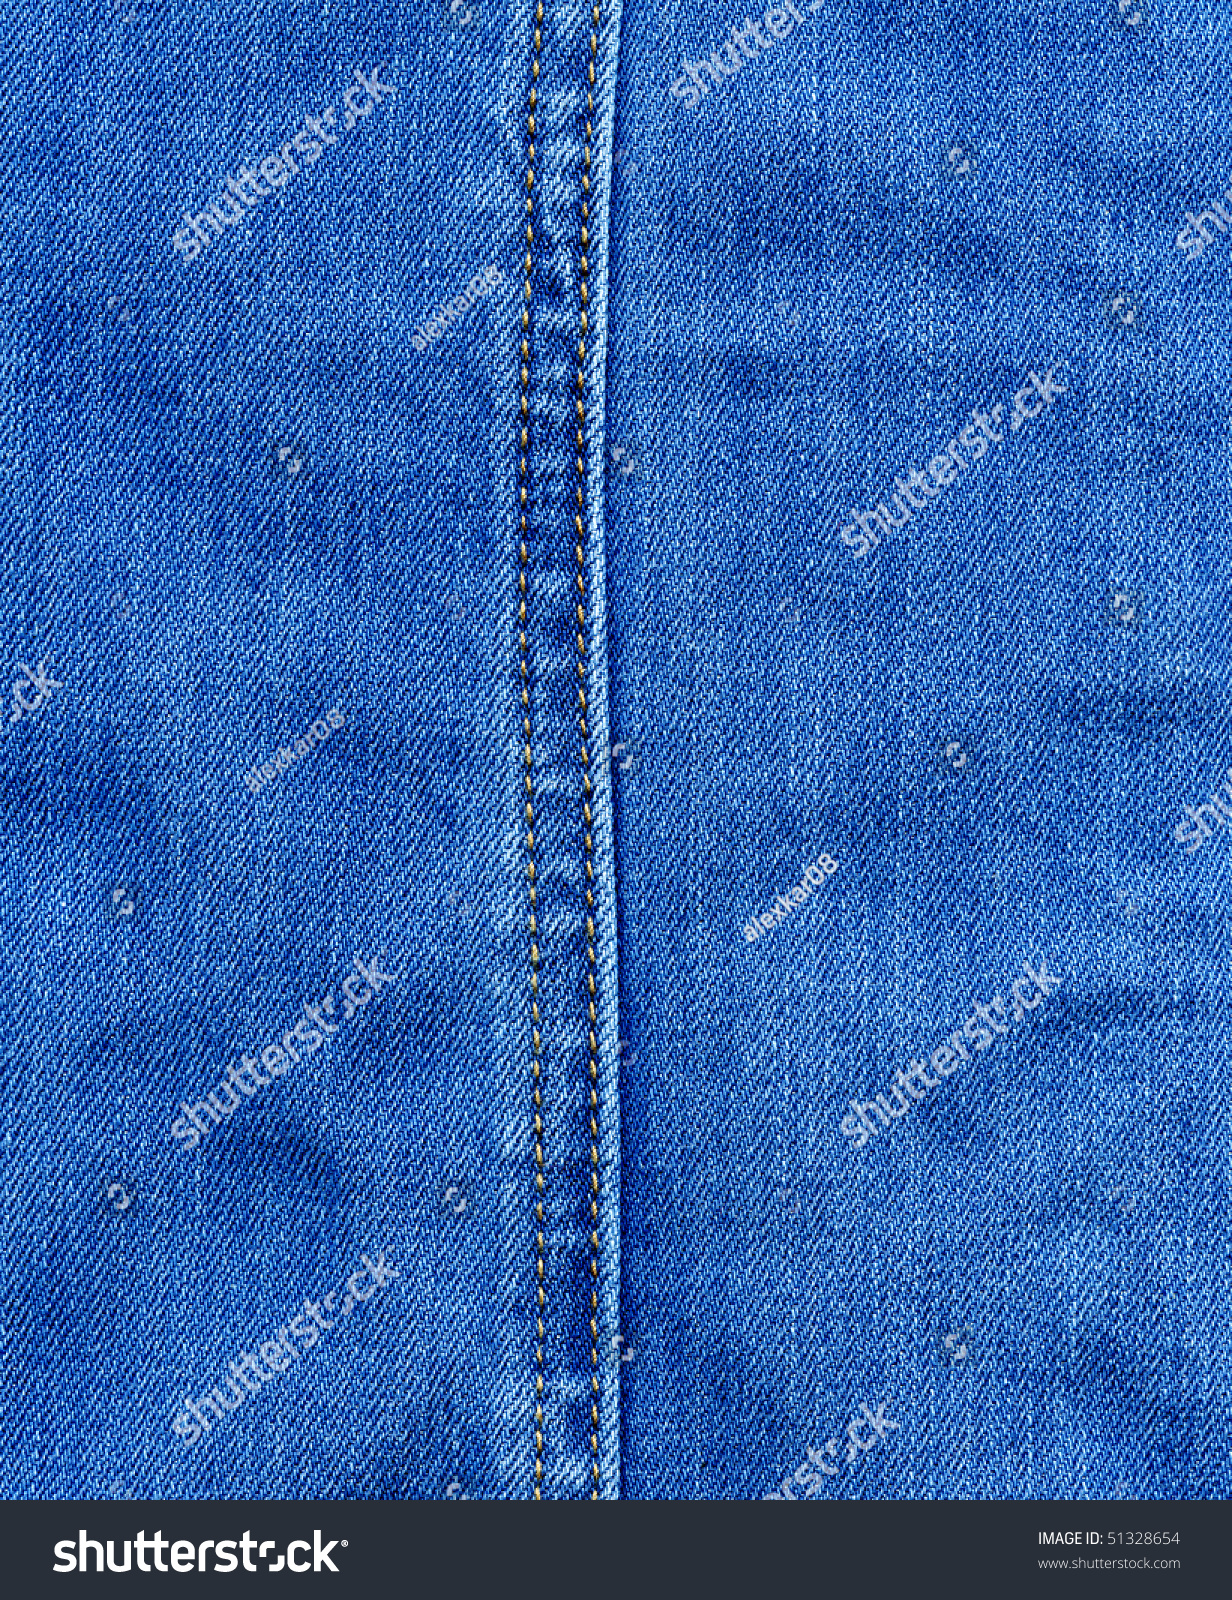 Stitched Textured Blue Denim Fabric Jeans Background Stock Photo ...